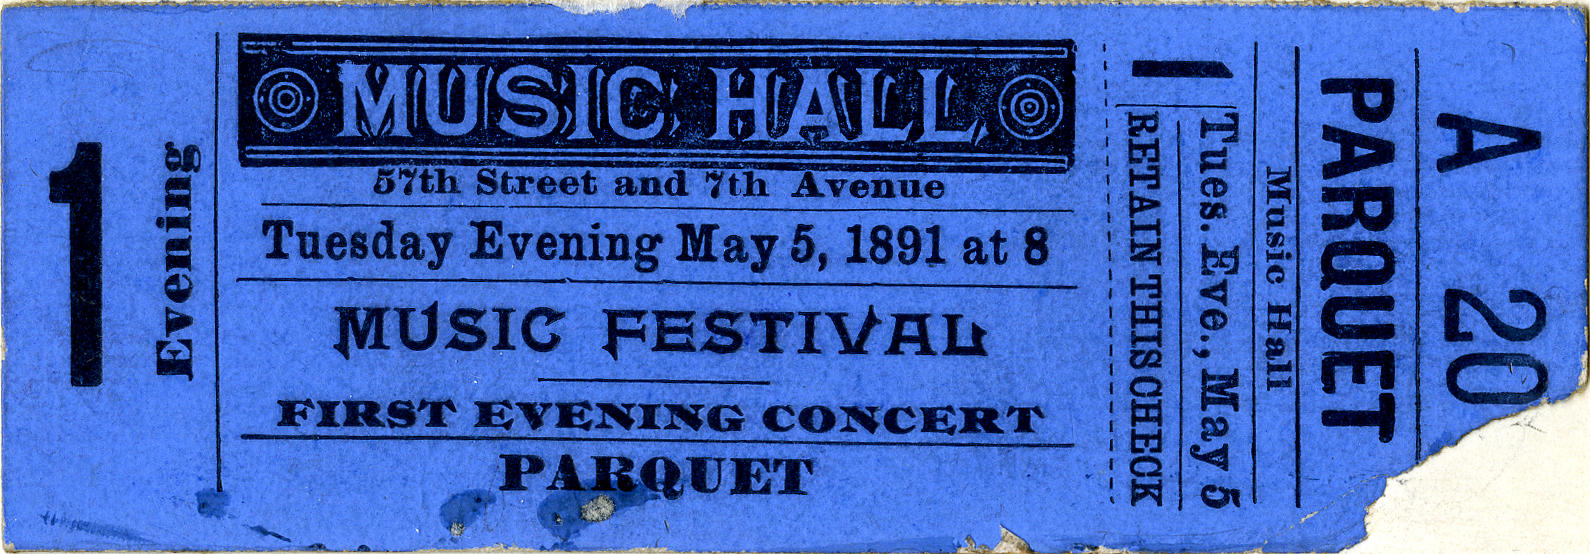 Ticket from Carnegie Hall’s opening night concert on May 5, 1891. The Opening Week Music Festival ran from May 5 to May 9, 1891, and featured guest conductor Pyotr Ilyich Tchaikovsky.